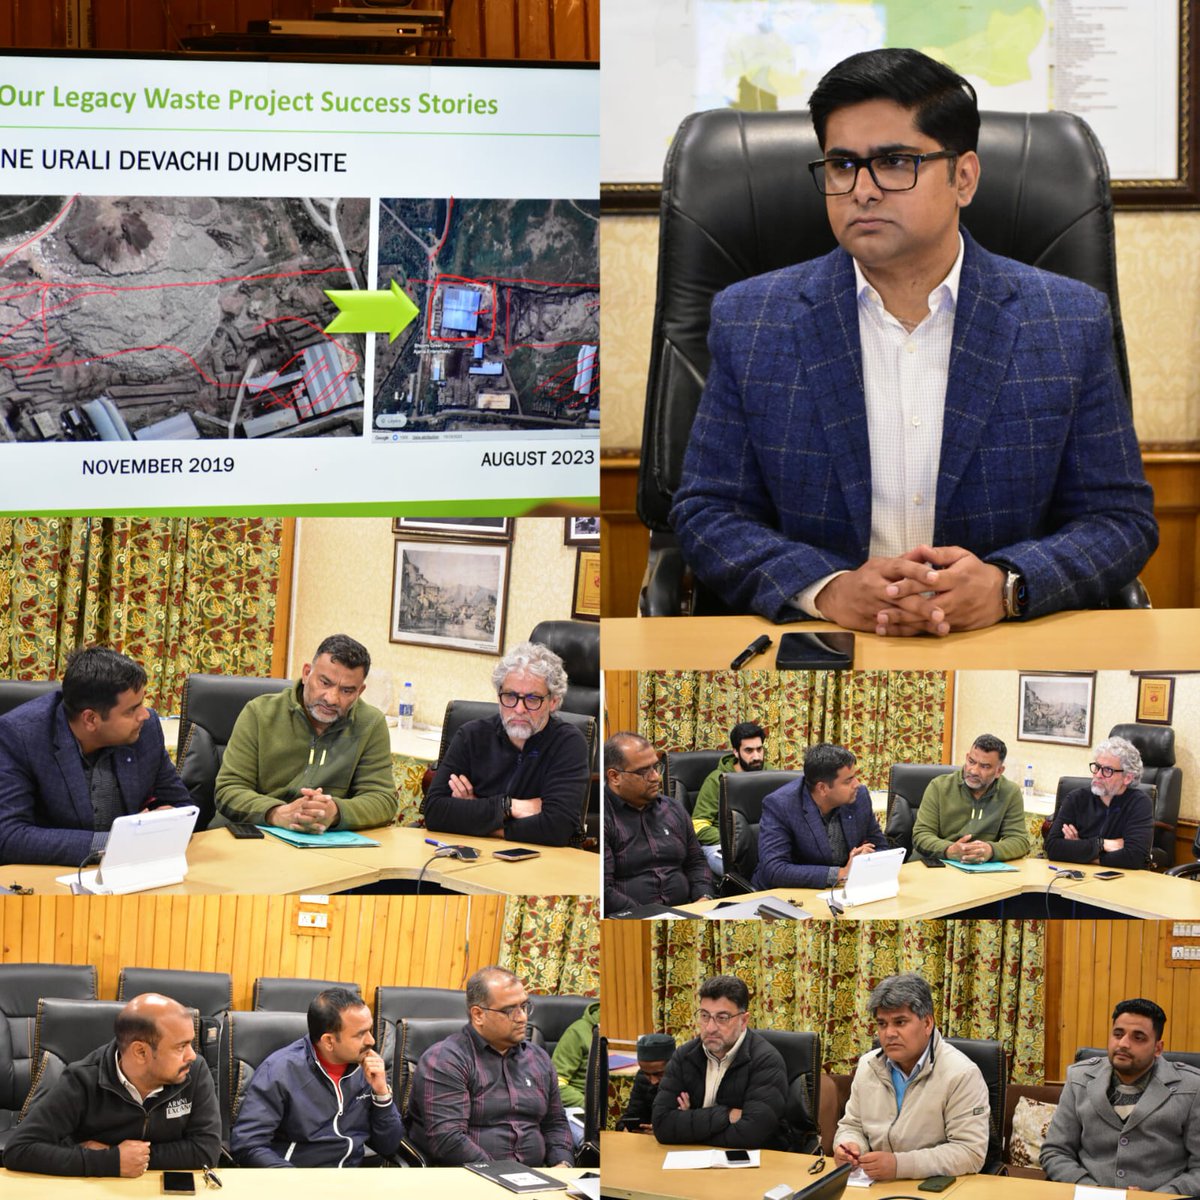 Commissioner SMC Dr. @owais_ias led a review session on the Management of #MunicipalSolidWaste, the session brought together key stakeholders & experts to address the issue. All Stakeholders and Experts showcased their projects designed to foster a greener & sustainable future.